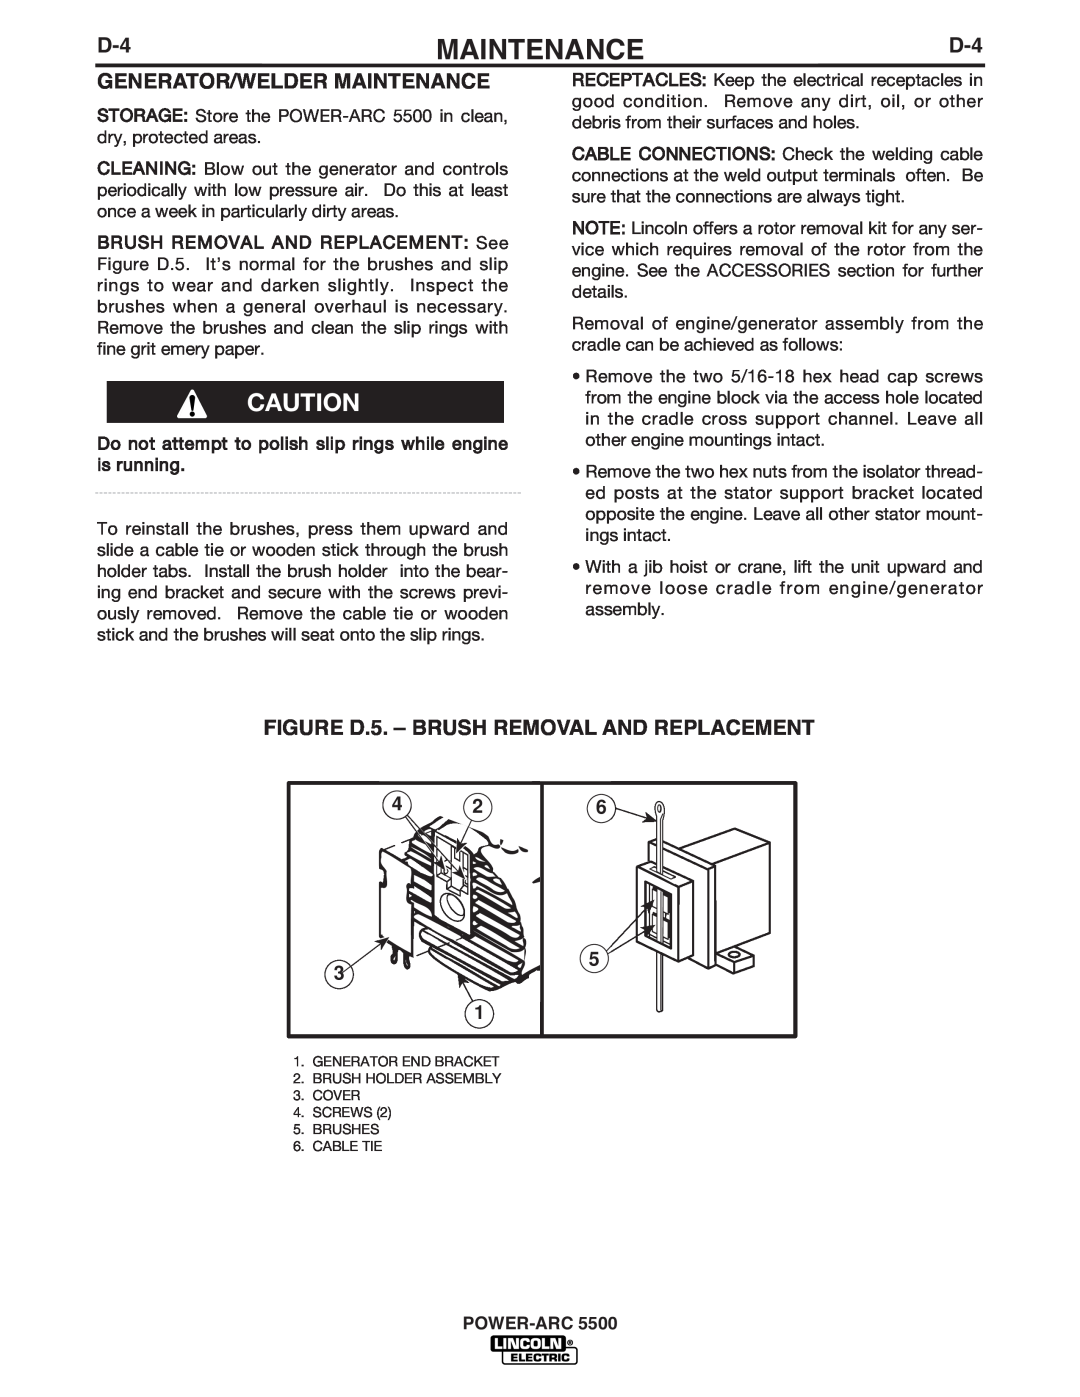 Lincoln Electric IM871-A manual Generator/Welder Maintenance, FIGURE D.5. – BRUSH REMOVAL AND REPLACEMENT, POWER-ARC5500 